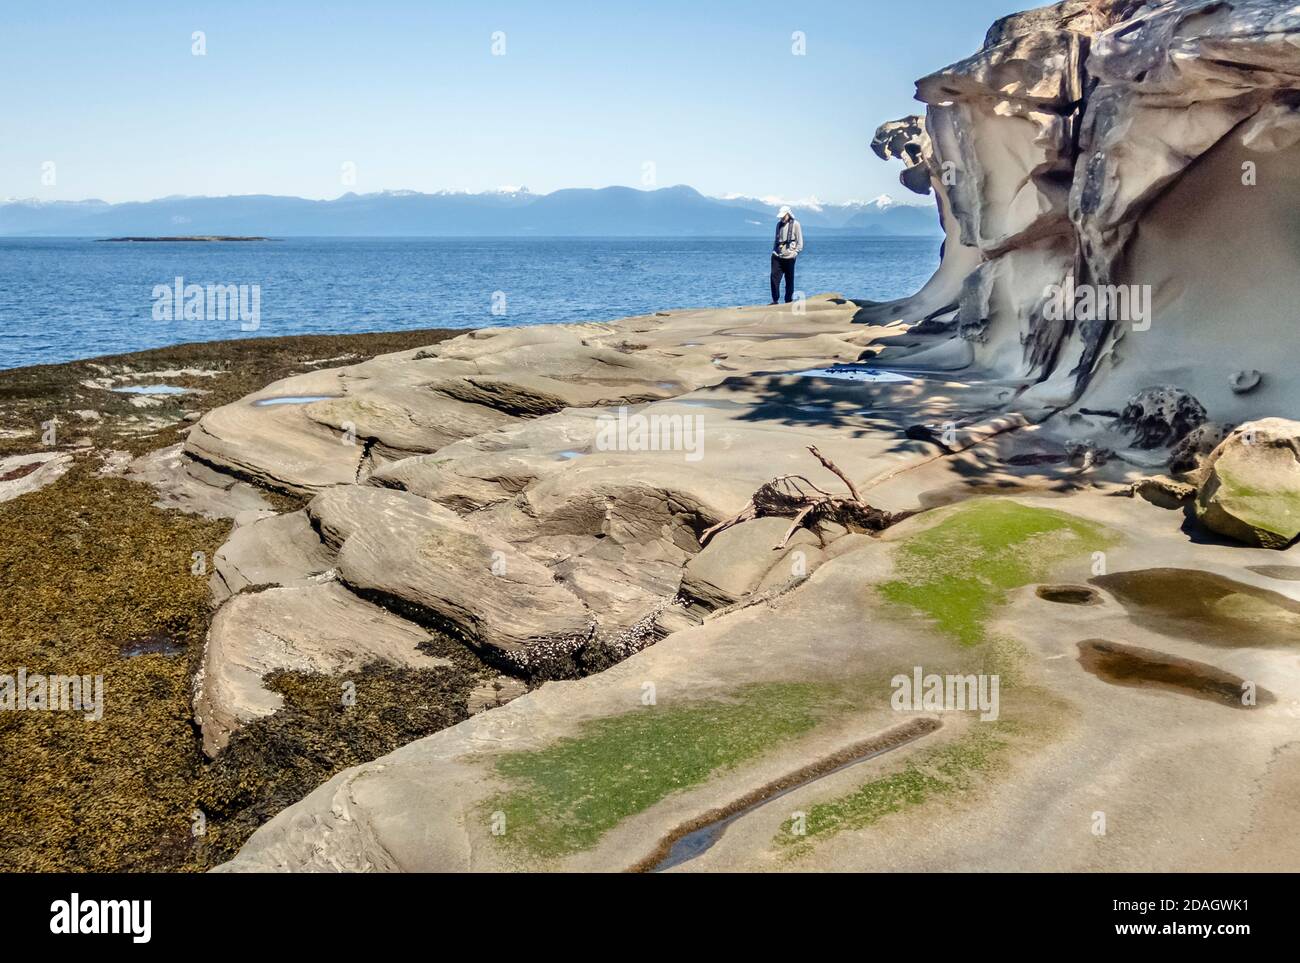 On a sunny day at low tide, a man walks on an eroded sandstone island shore, with the Strait of Georgia and BC's Coast Mountains in the background. Stock Photo